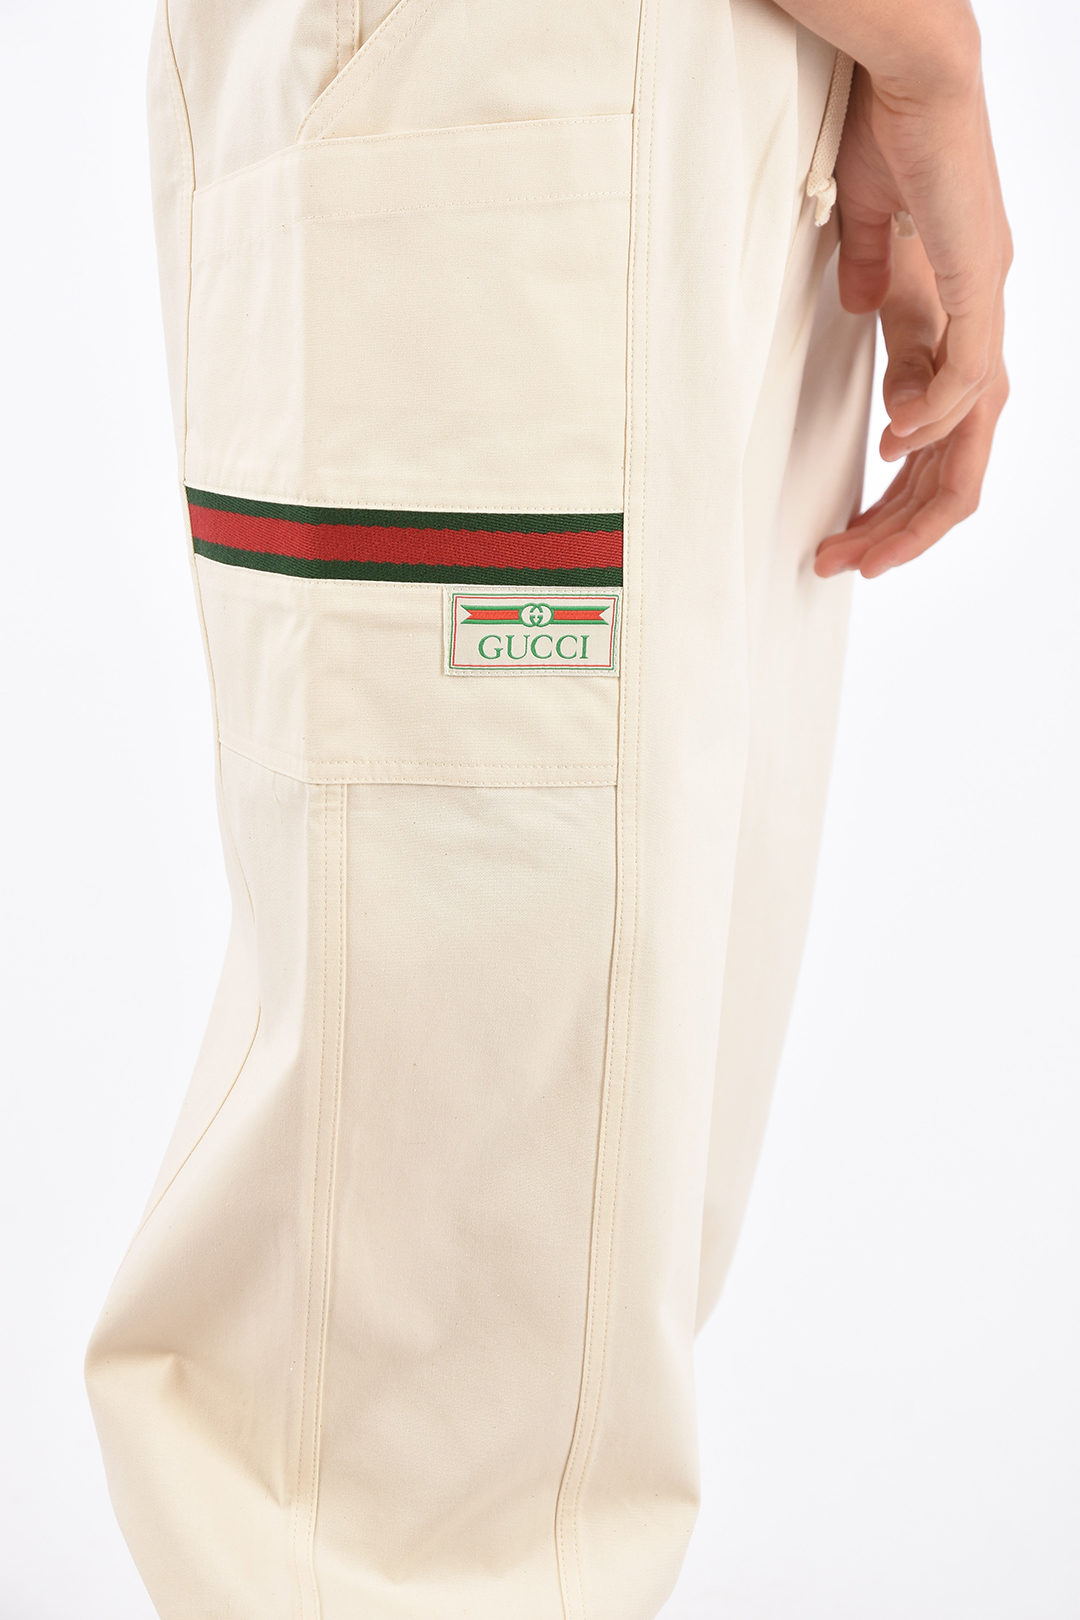 Gucci drawstring pants with elastic ankle band women - Glamood Outlet